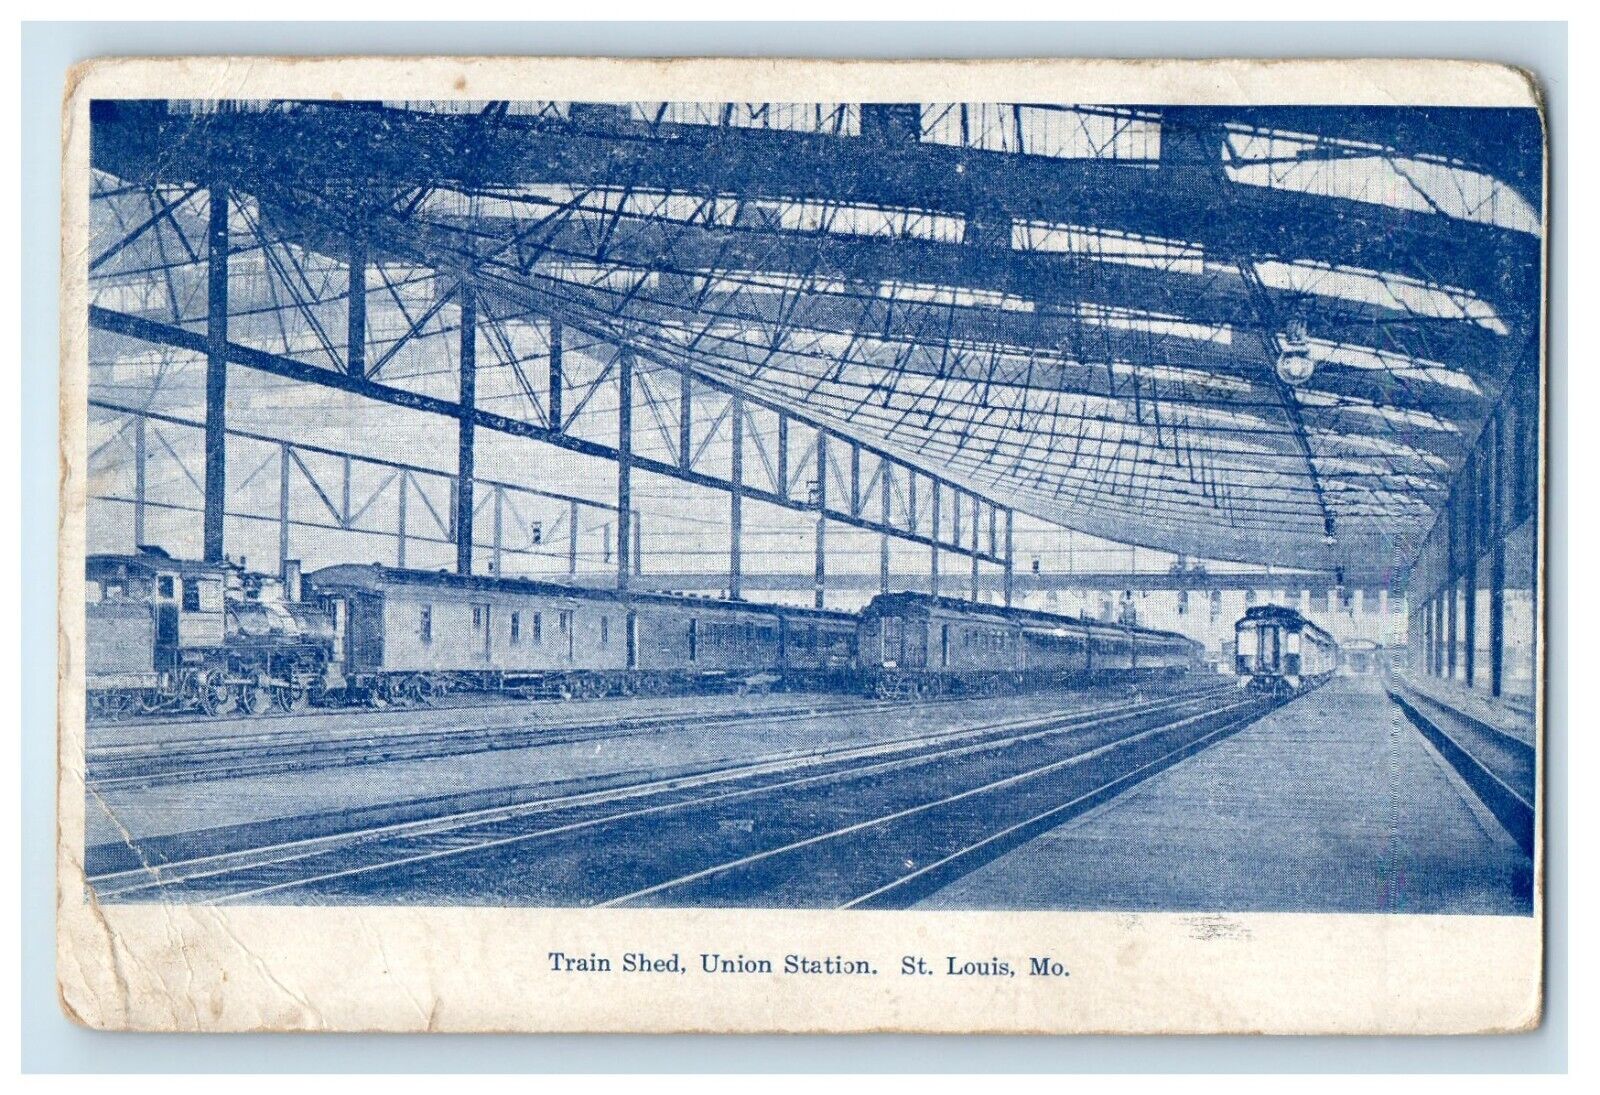 1909 Train Shed Union Station St. Louis Missouri MO Posted Antique Postcard